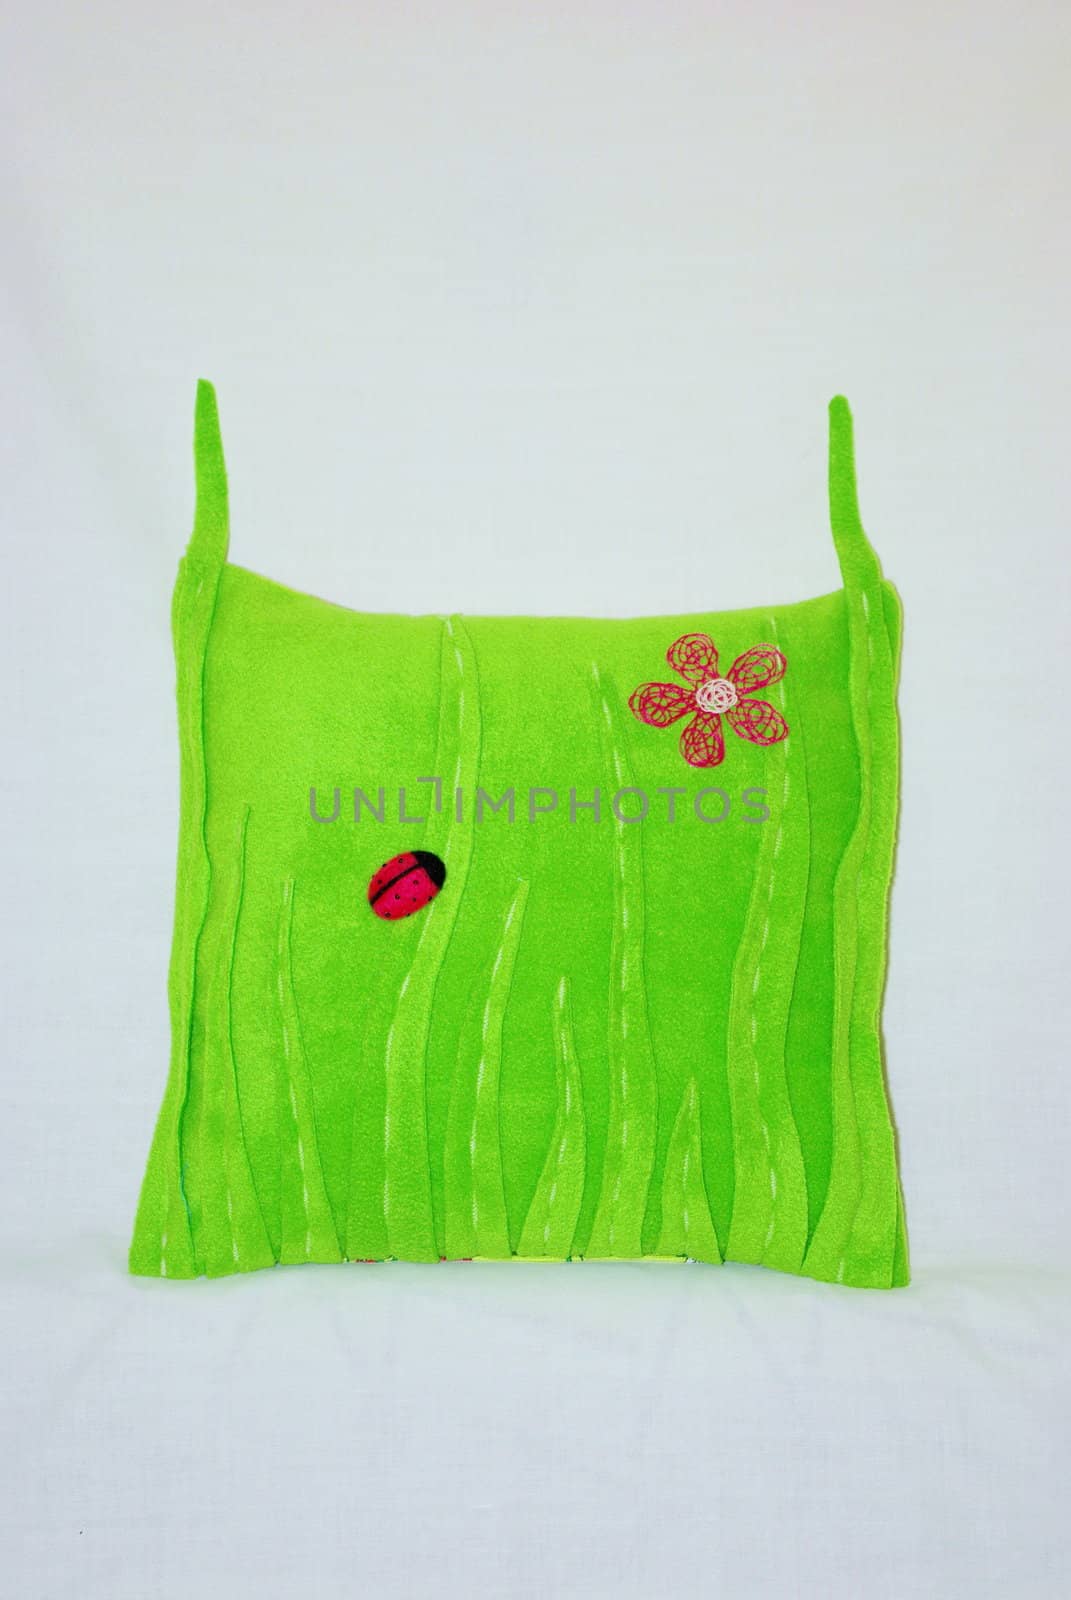 Decorated green pillow by Vitamin